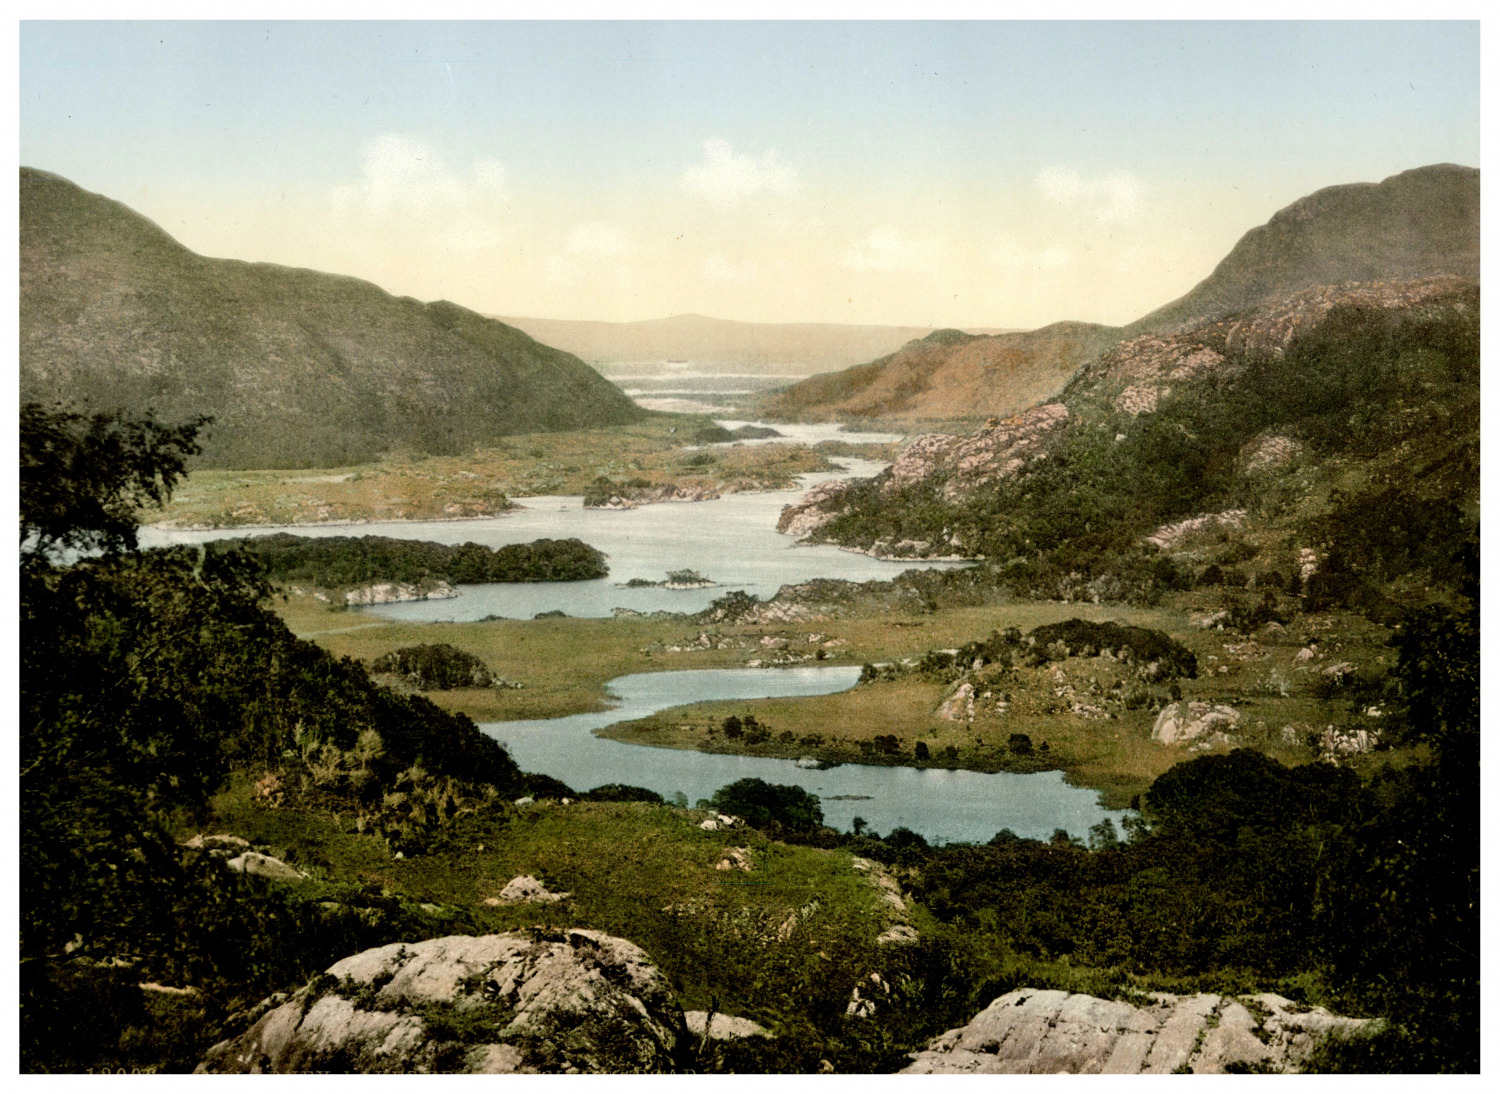 Ireland. County Kerry. Killarney. Lakes from Kenmare Road. Vintage Photochrome by